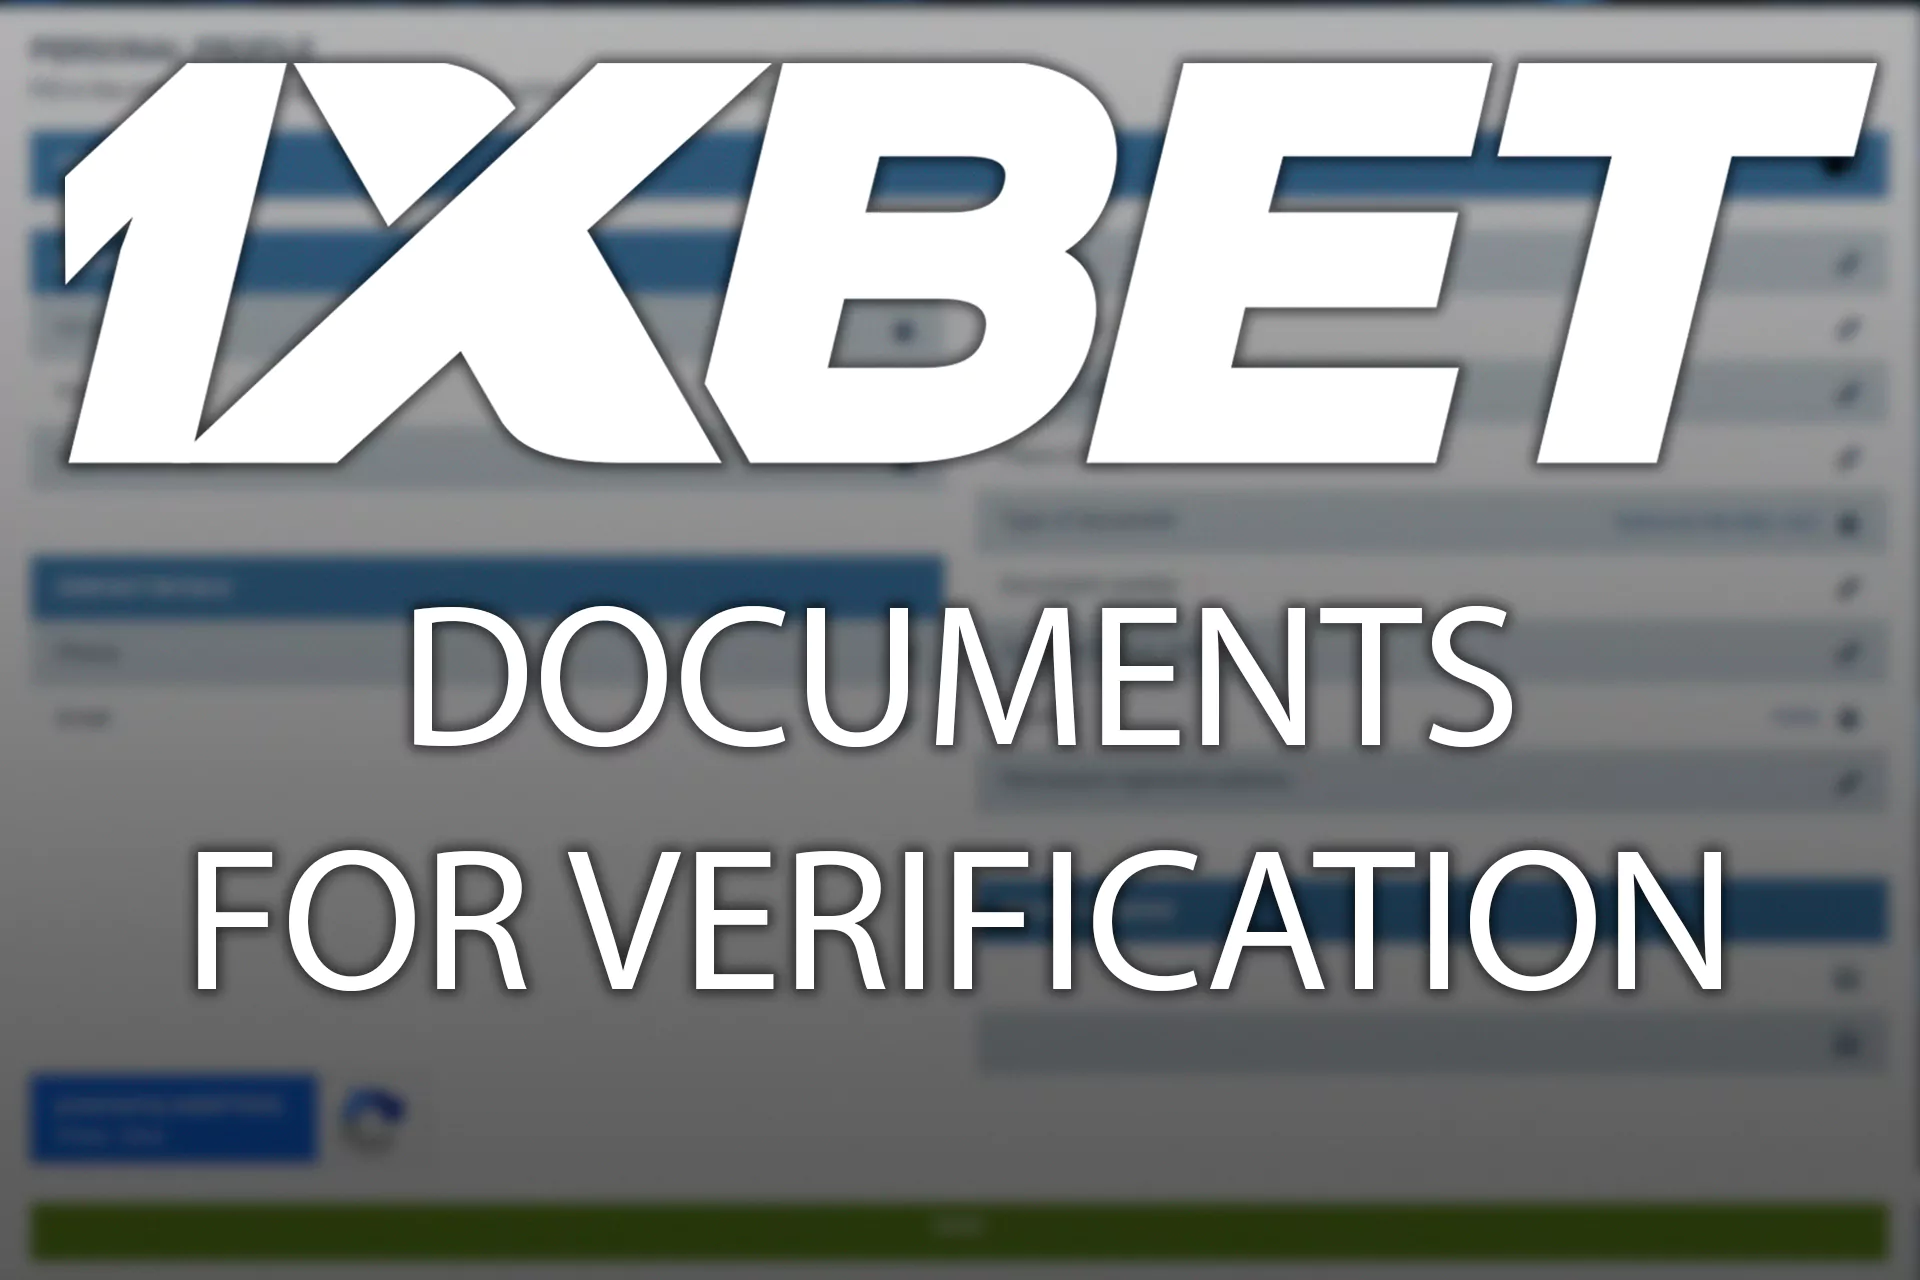 To verify your 1xBet account, you need to confirm your identity.